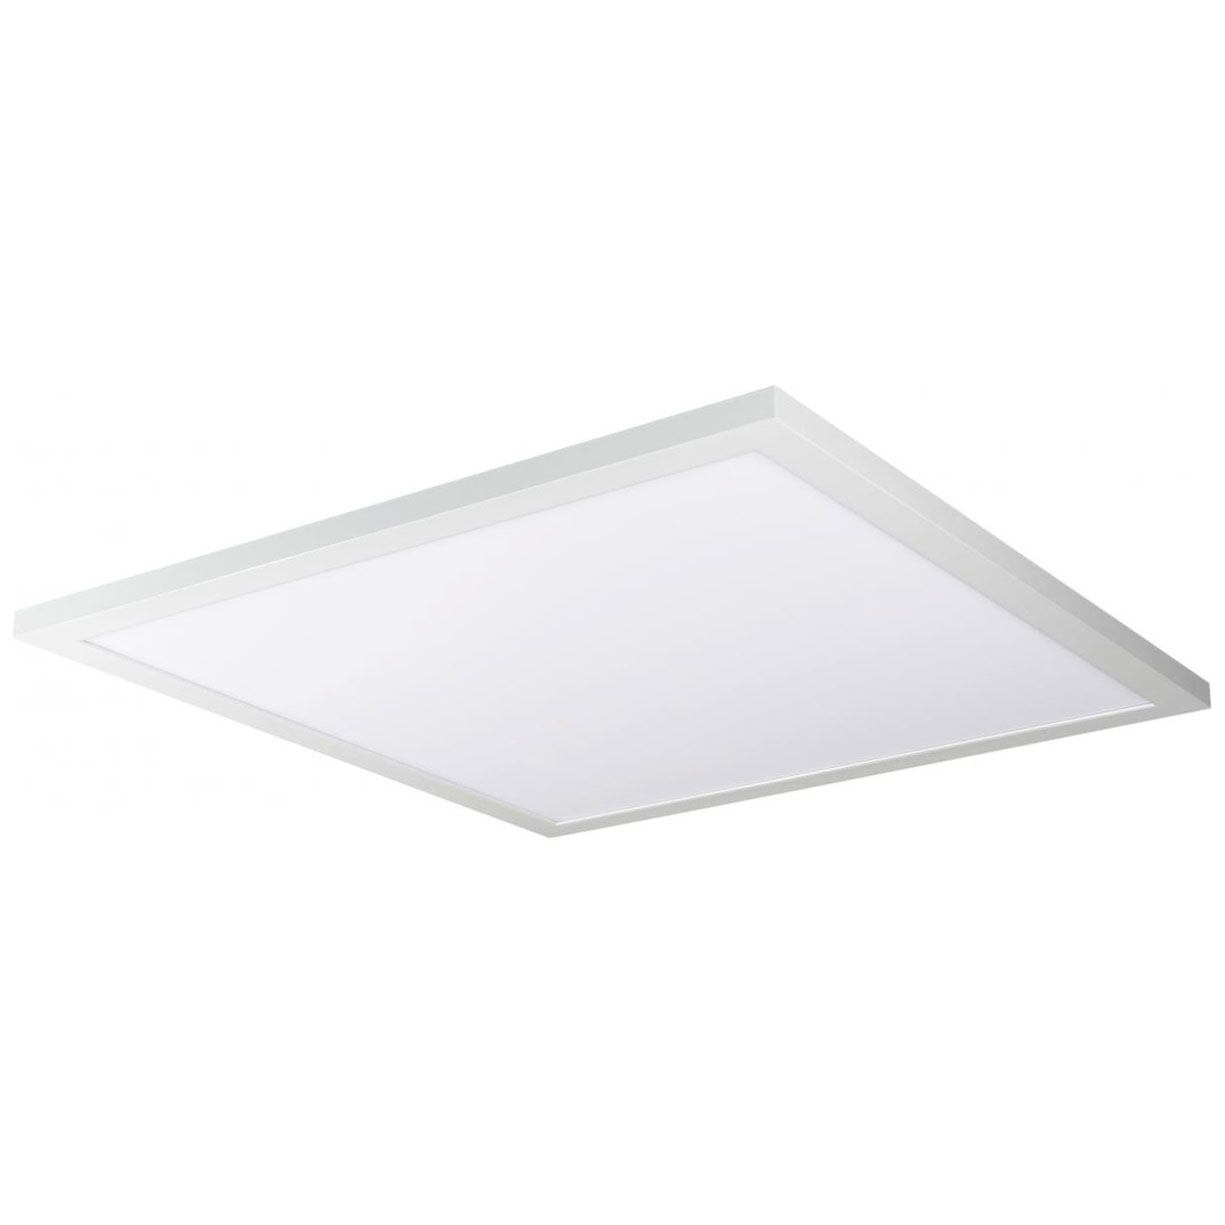 Blink Plus 2 X 2 Square Surface Mount Light by Nuvo Lighting | 62-1053 |  NVO583660